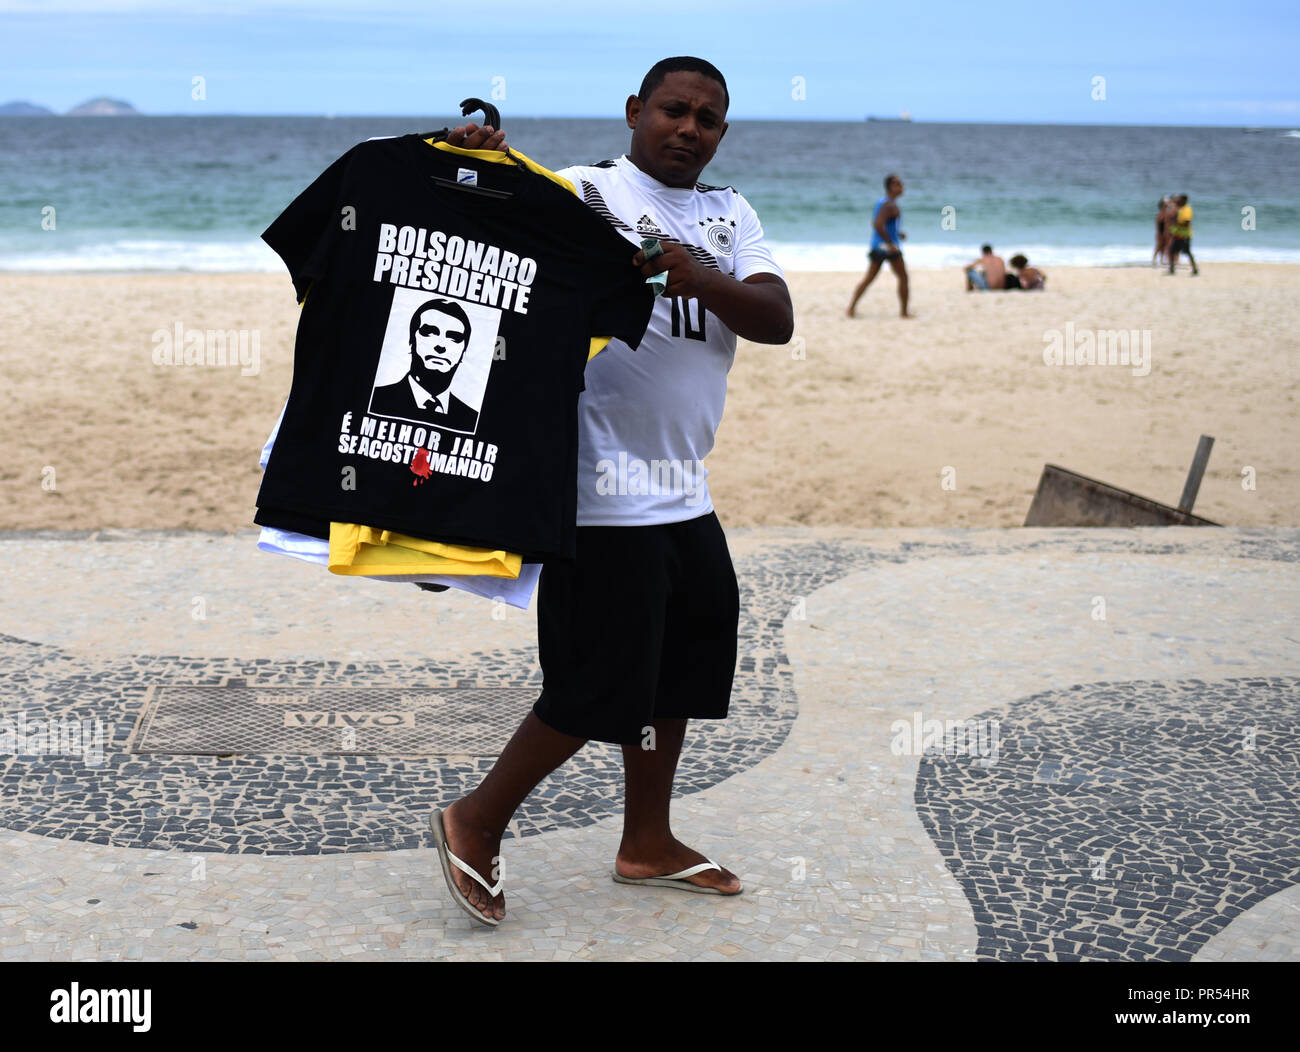 Rio de Janeiro, Brazil. 29th Sep, 2018. A man sells T-shirts at Copacabana beach to support right-wing presidential candidate Bolsonaro. This Saturday, rallies against the ex-military are also expected. Bolsonaro is the favourite in the presidential election on 7 October, since a court banned the candidacy of detained ex-president Lula da Silva. Brazil's "trump card" has been involved in politics for a long time, but has recently presented itself as an anti-system candidate. Credit: Fabio Teixeira/dpa/Alamy Live News Stock Photo